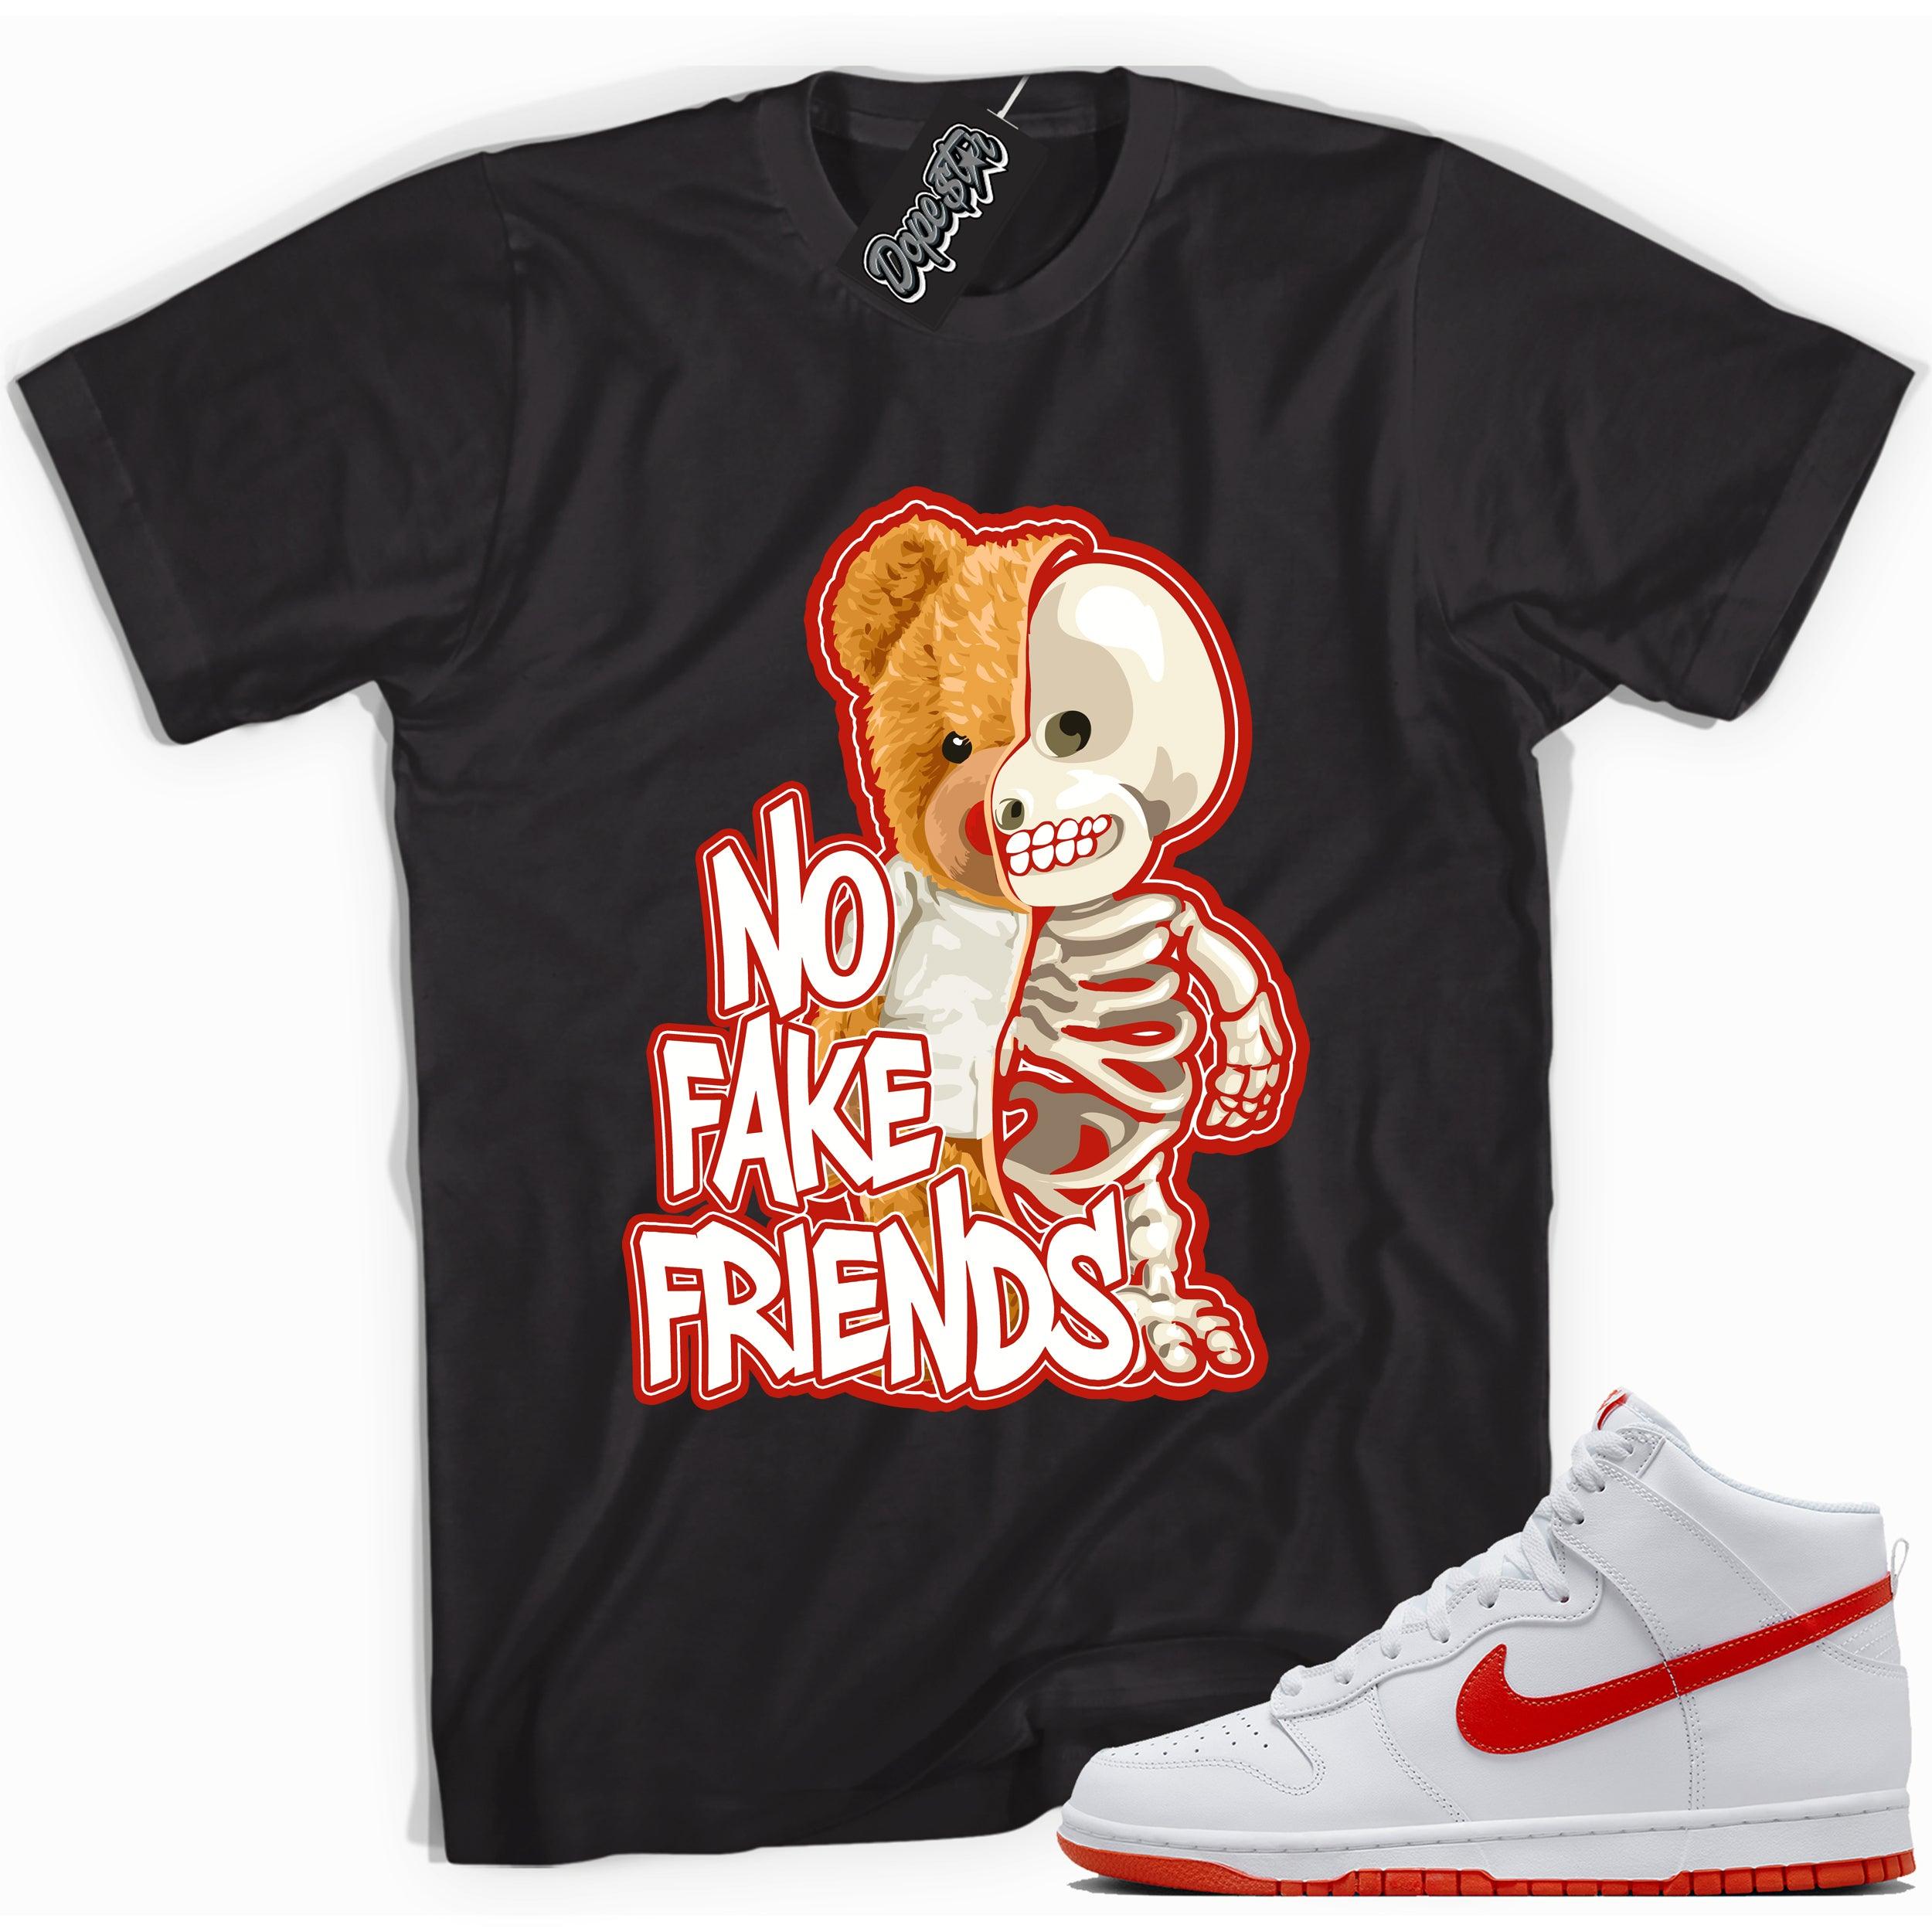 Cool black graphic tee with 'no fake friends' print, that perfectly matches Nike Dunk High White Picante Red sneakers.